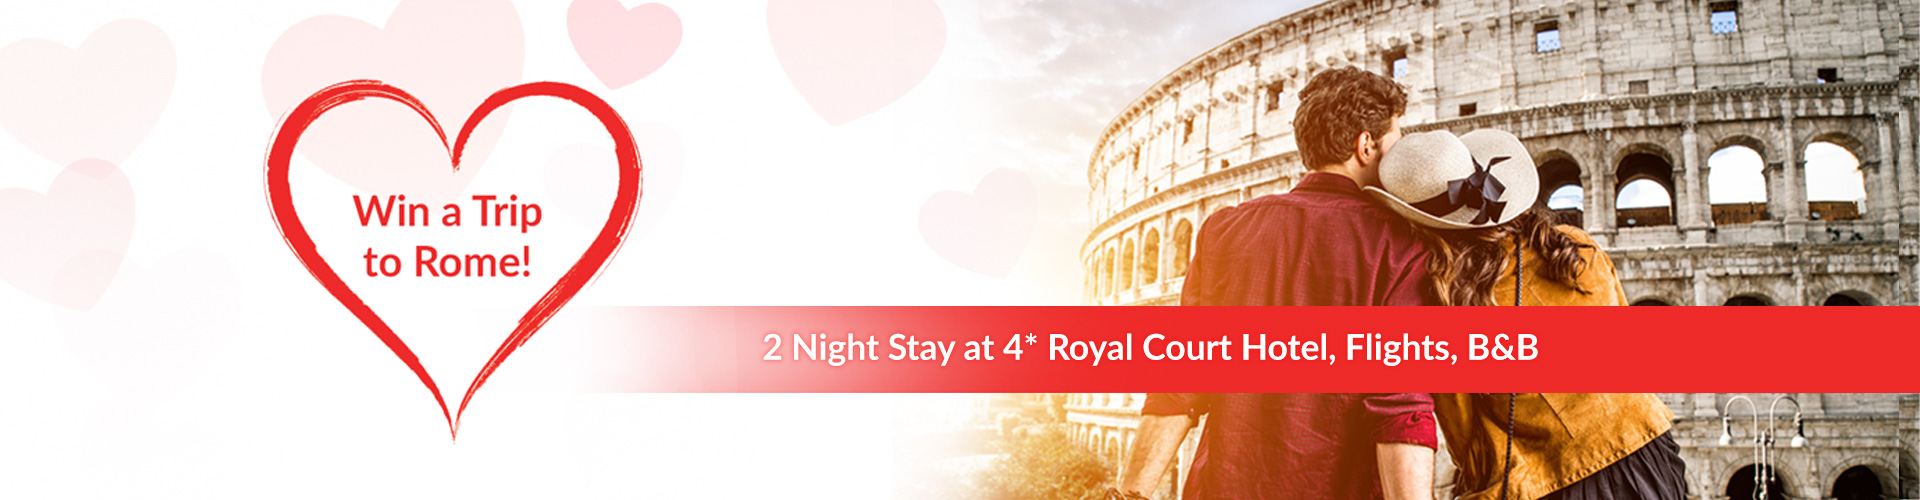 Join our Valentine's Day competition for a chance to win a romantic 2-night getaway to Rome!